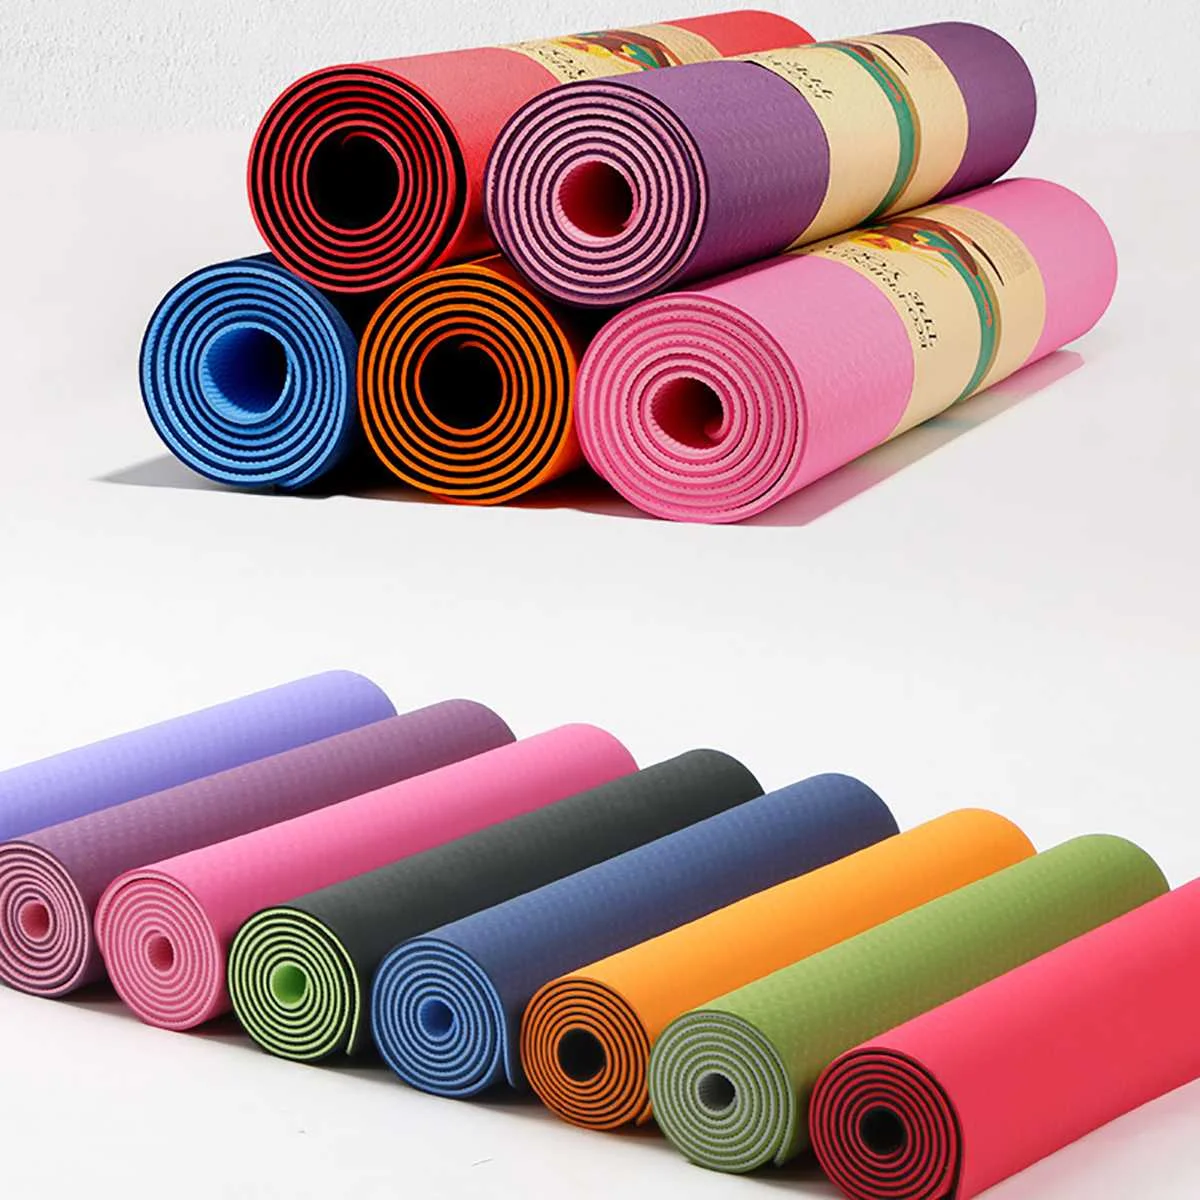 

6mm TPE Yoga Mat For Beginner Non-slip Mat Yoga Sports Exercise Pad With Position Line For Home Fitness Gymnastics Pilates Mats